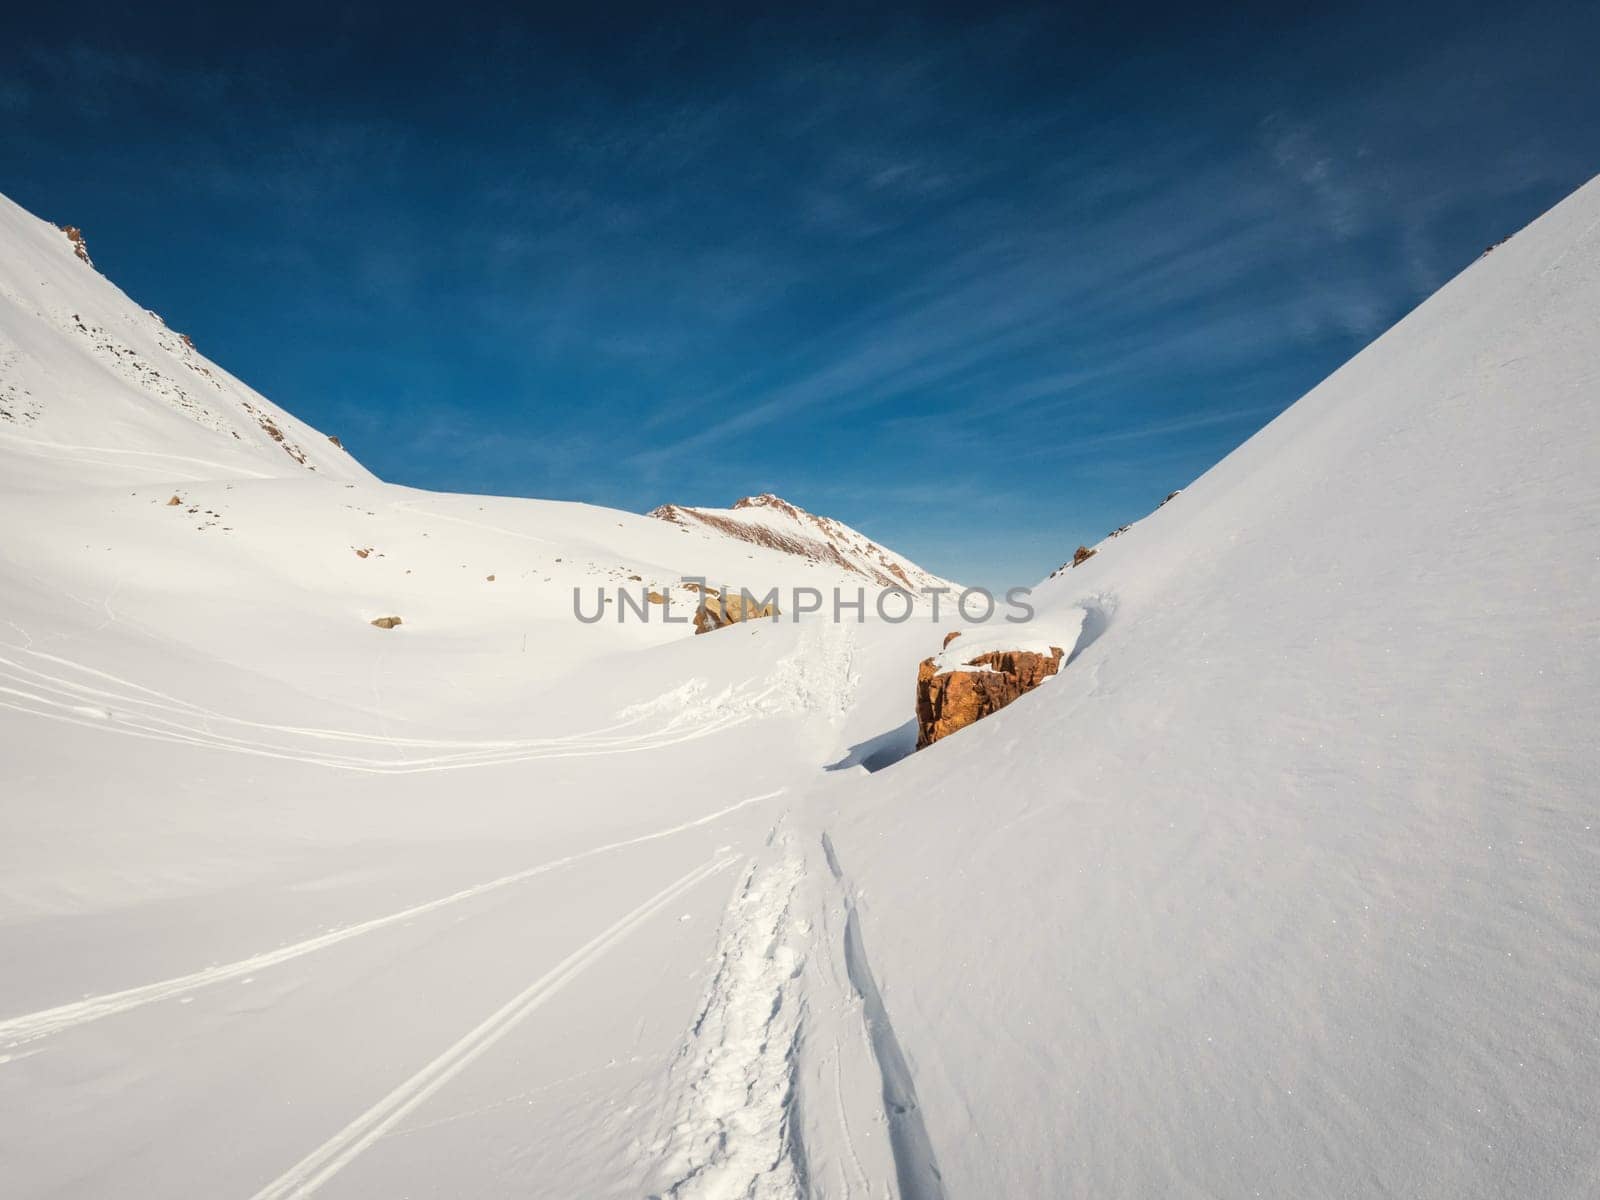 Mountain hilly winter landscape with traces of hiking trails and skis. snowy desert.